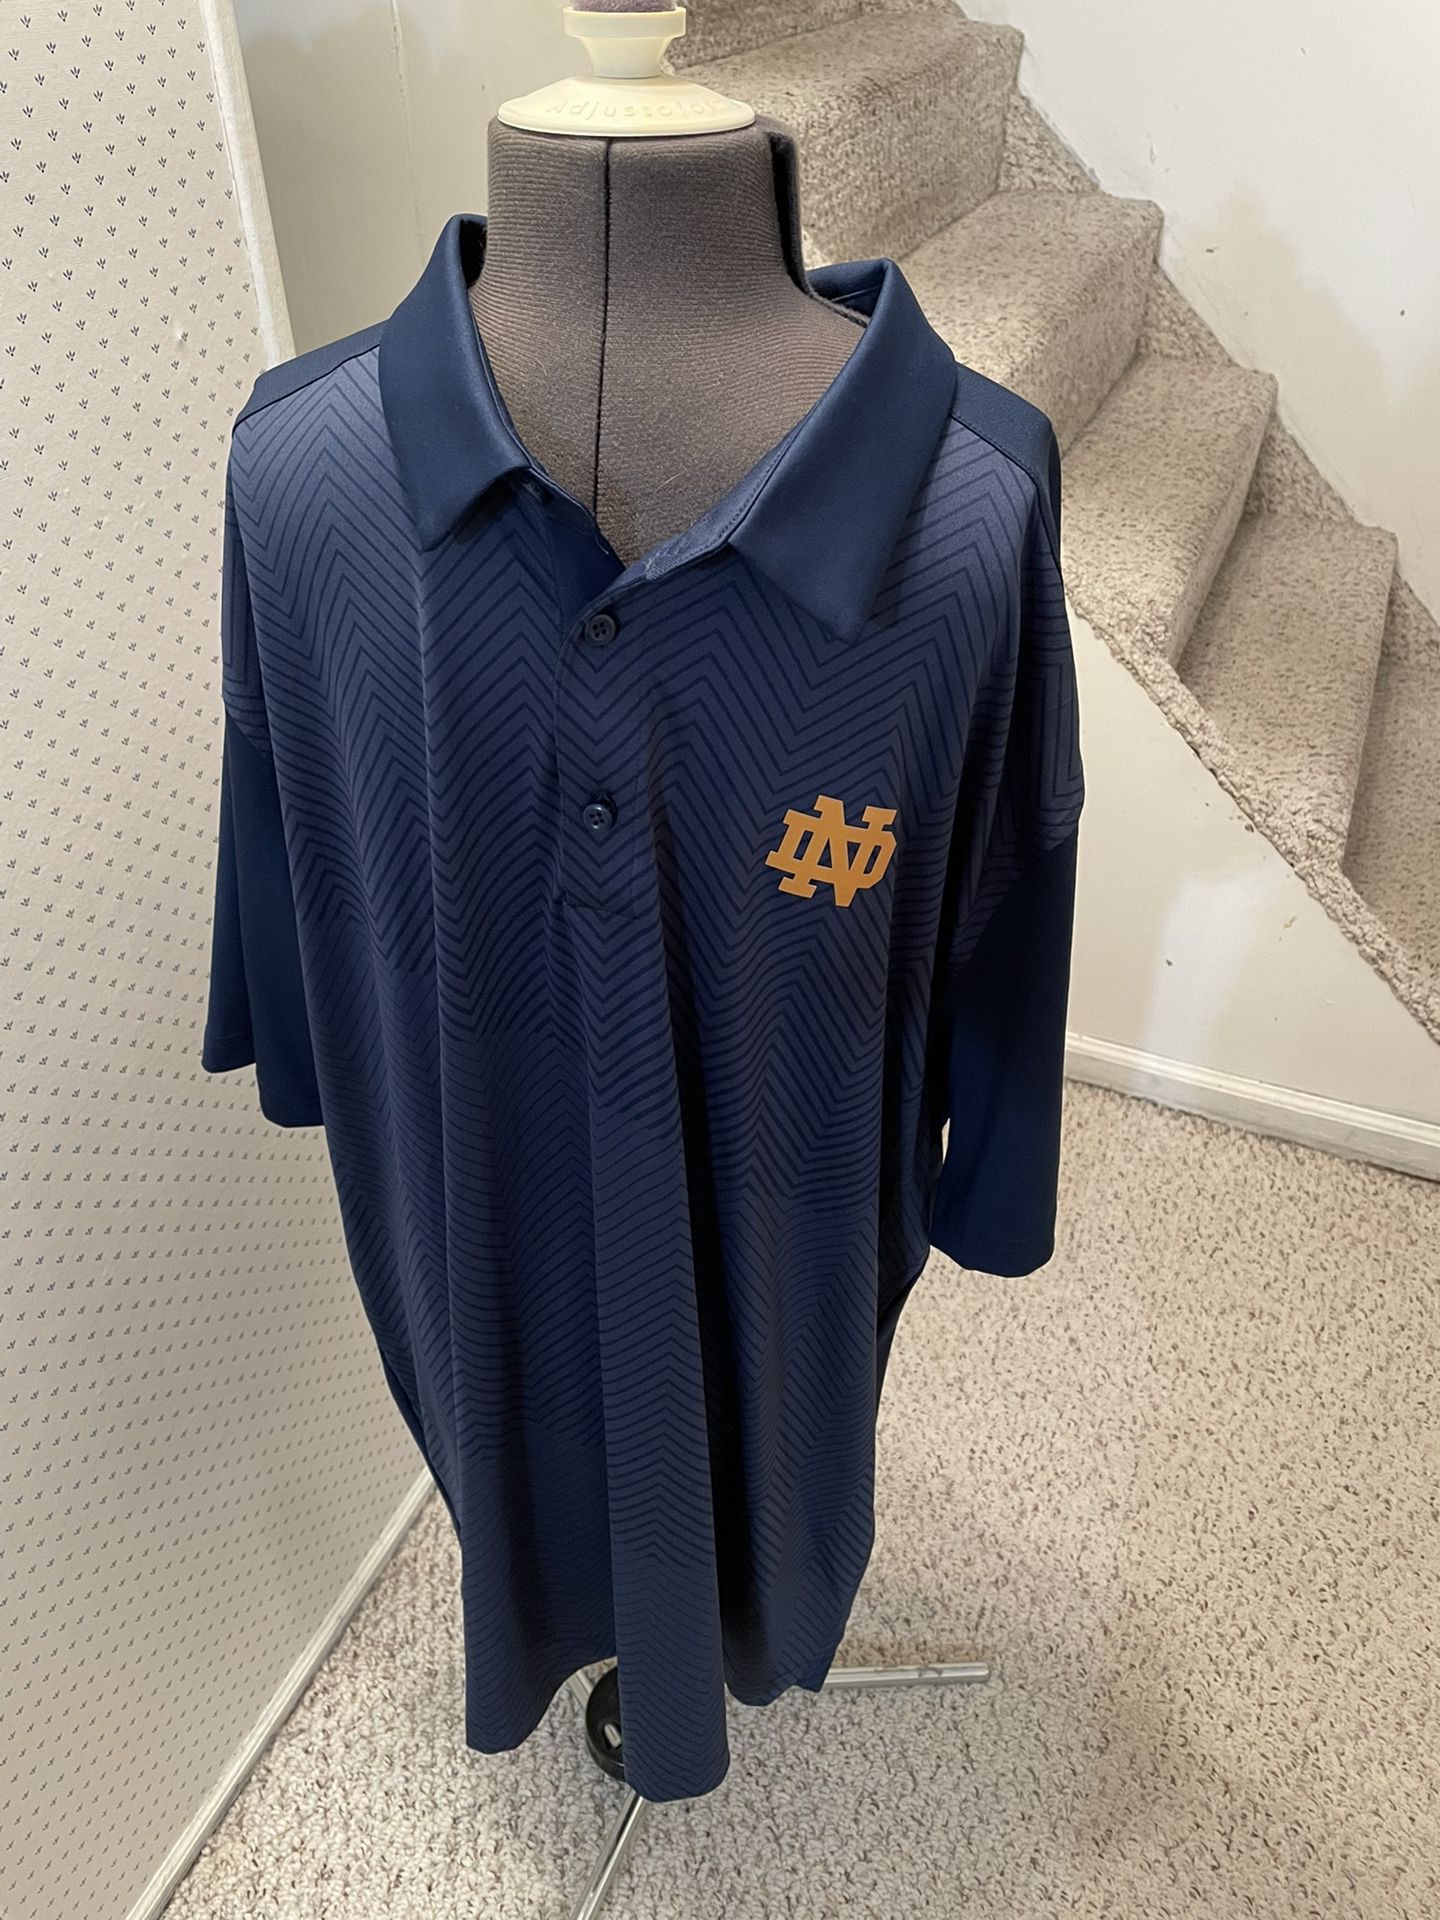 Notre Dame Under Armour Polo 2XL Brand New